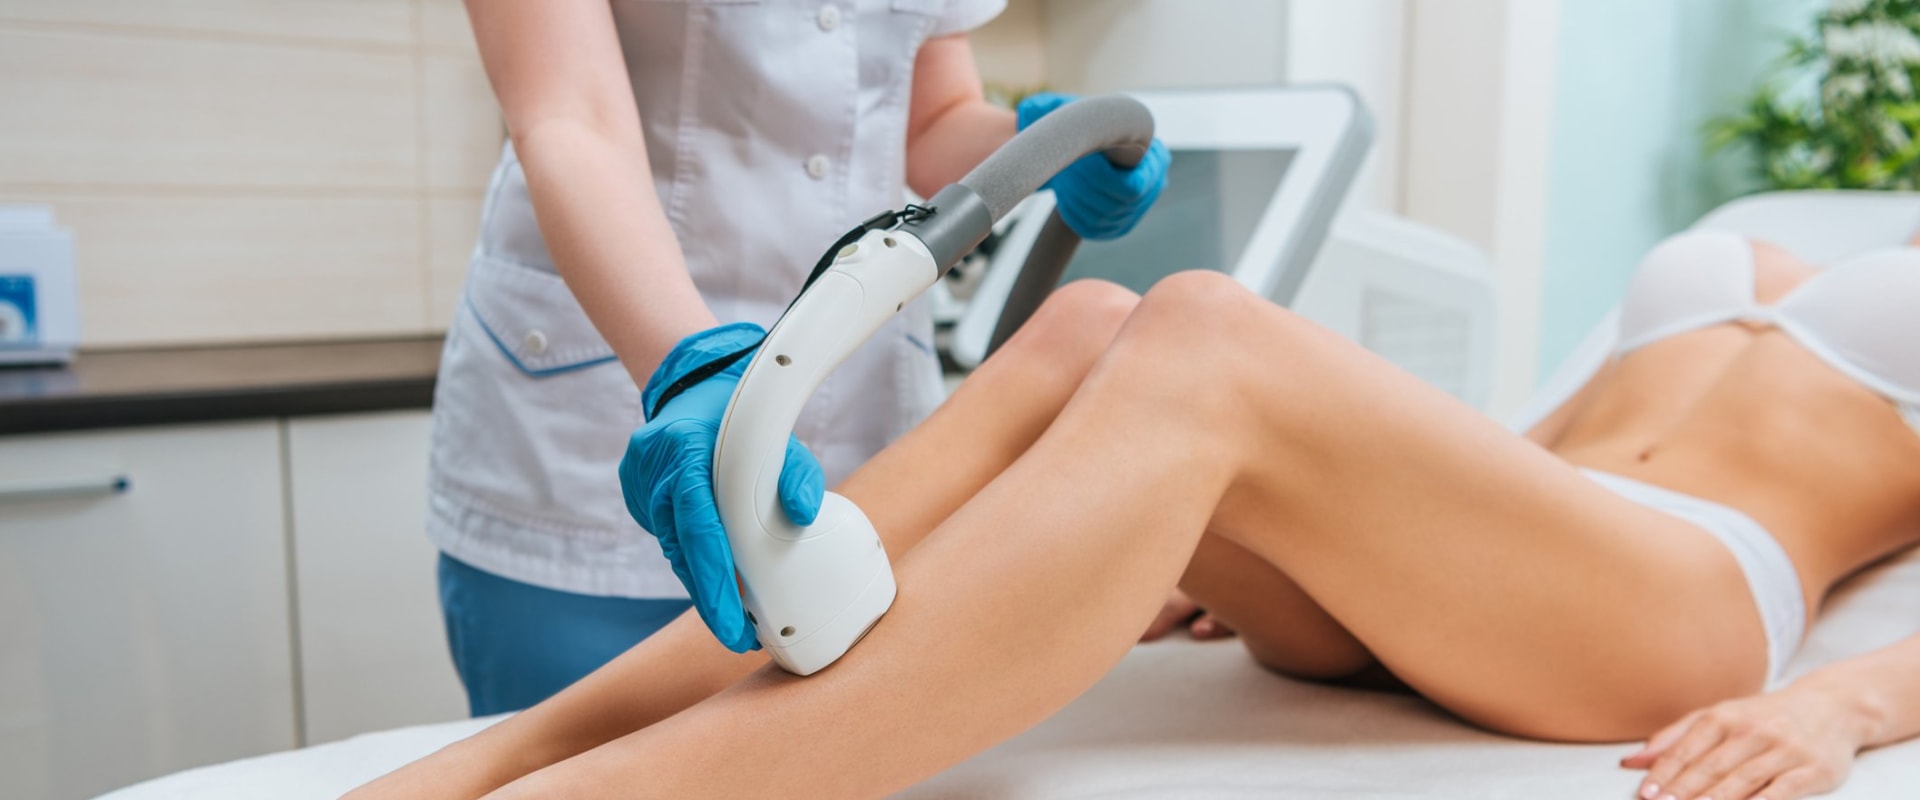 What to Know Before Your Laser Hair Removal Session